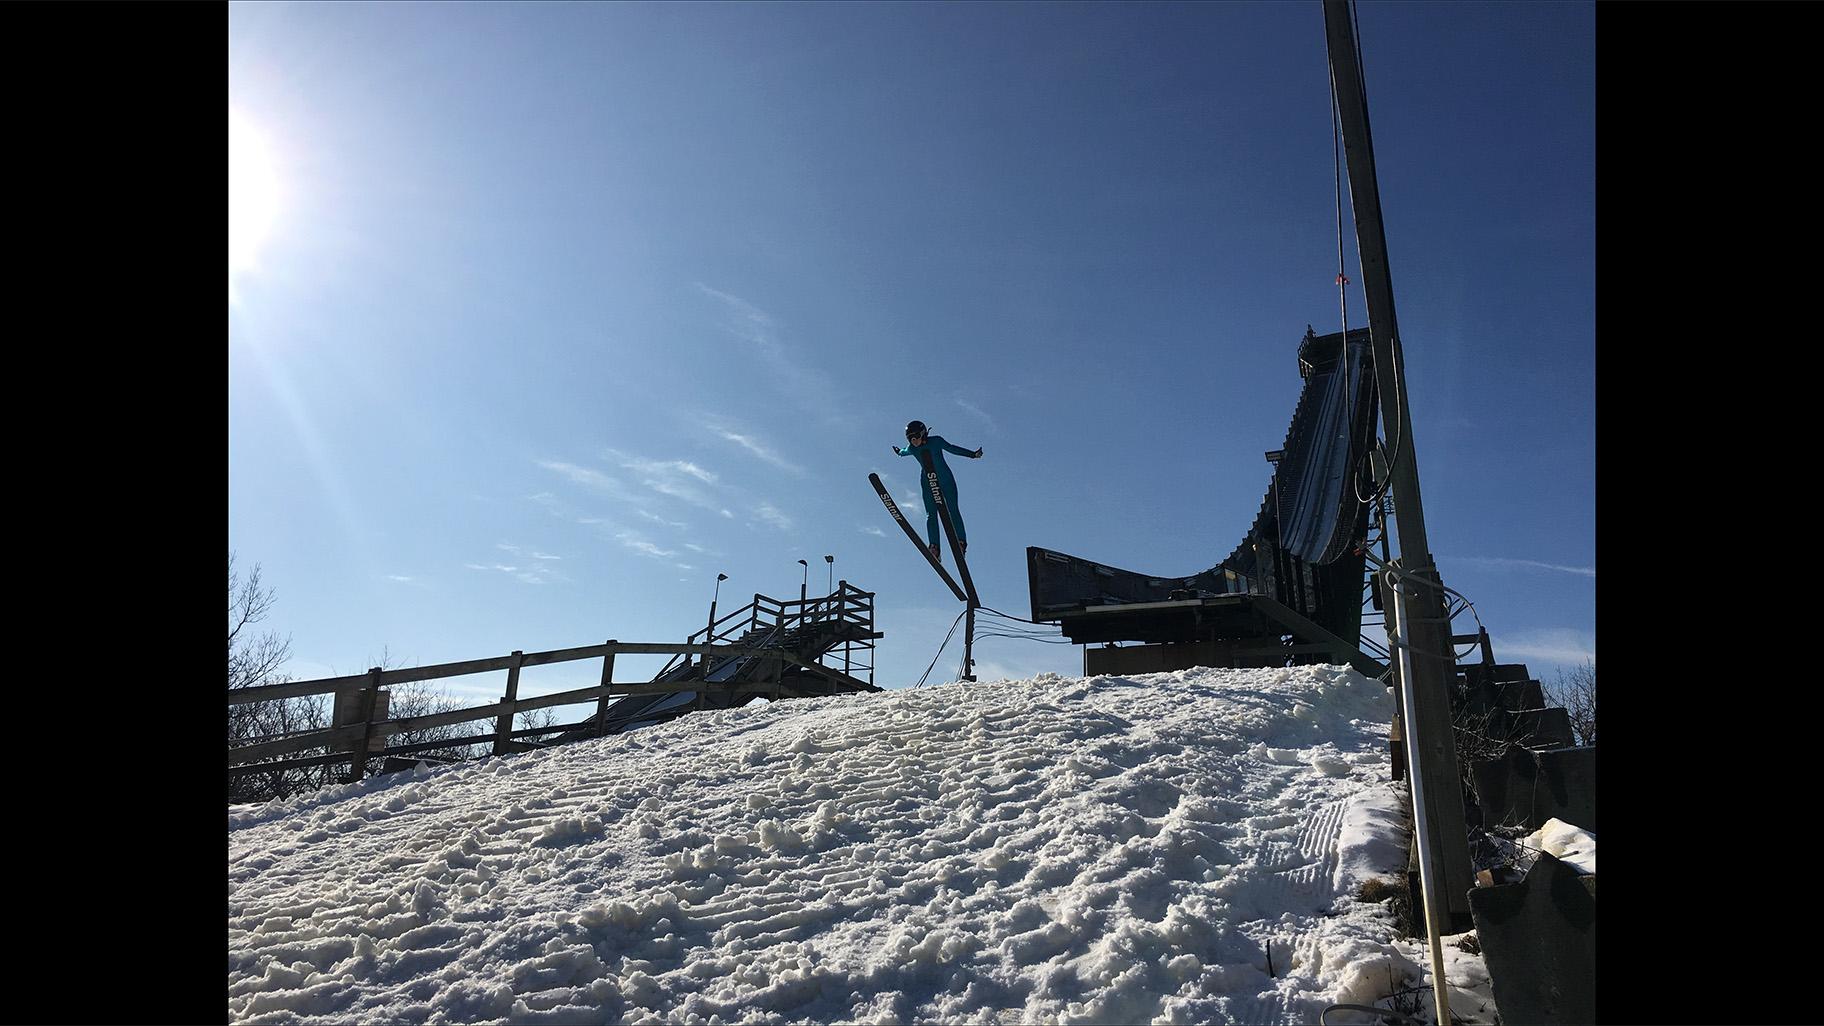 In the early 1900s, the Norwegian community found a slope west of the city in Fox River Grove to build the Norge Ski Club, which is still going strong and is an important training center for Olympic ski jumpers. (WTTW News)